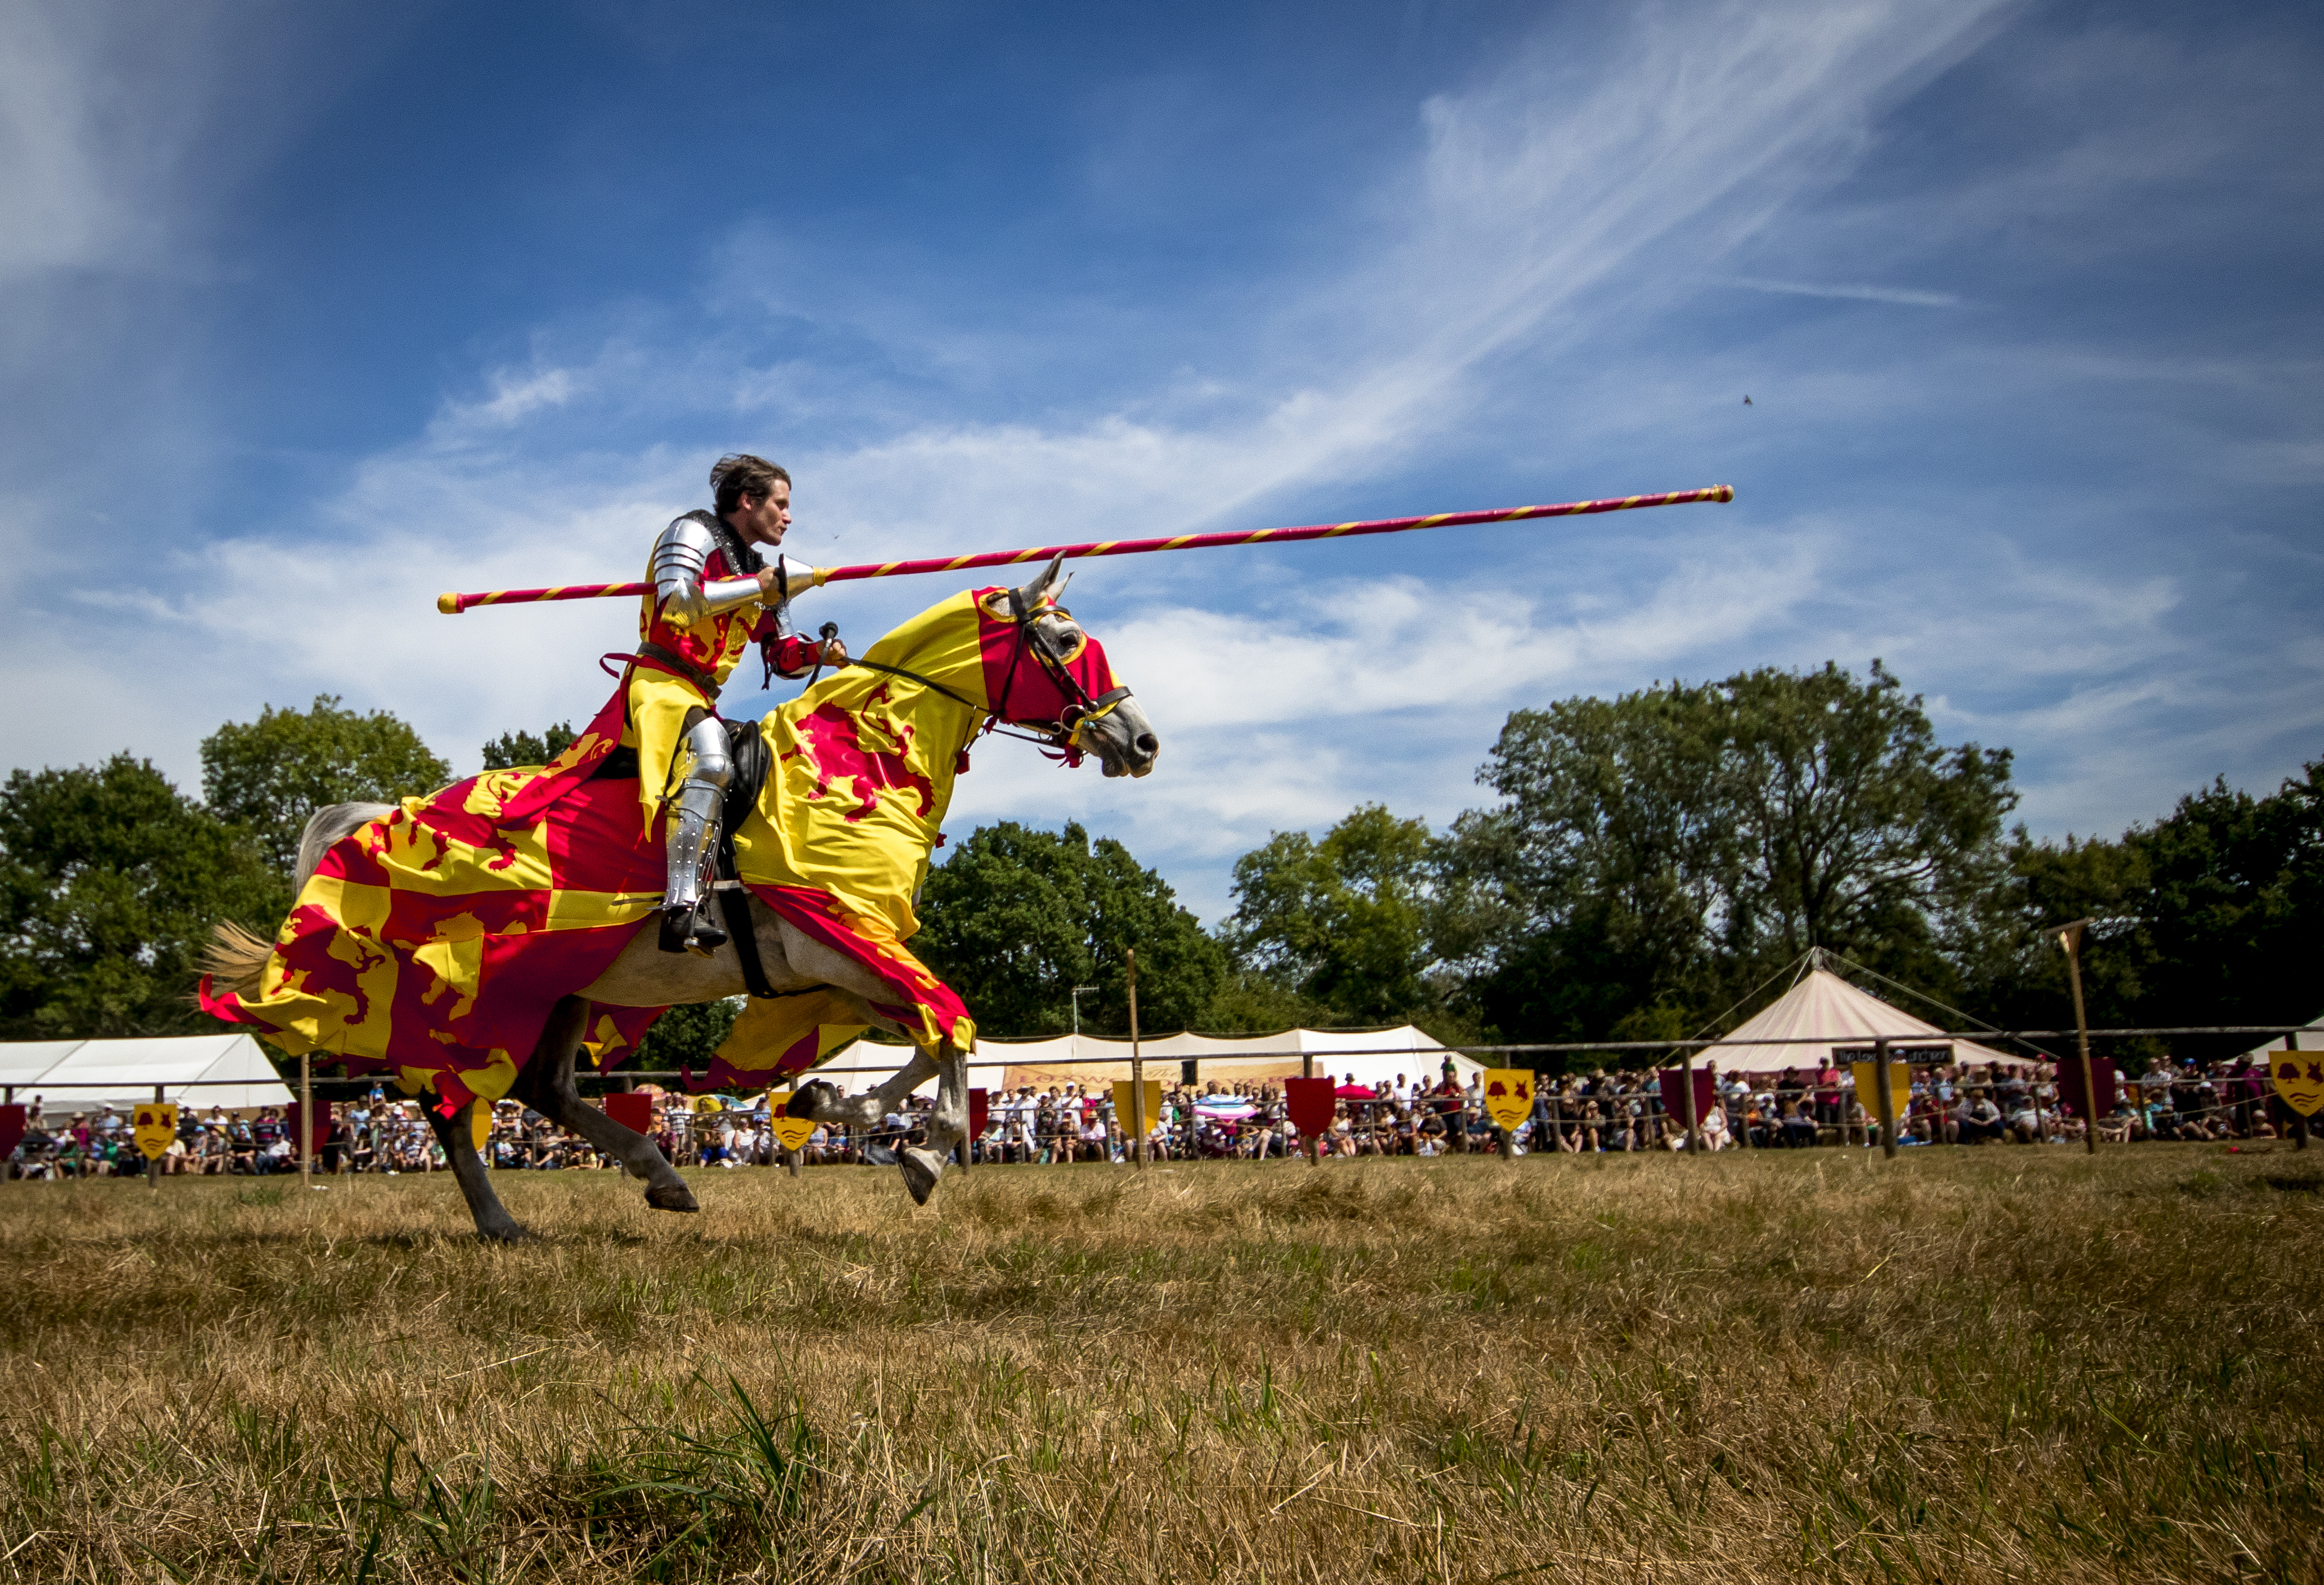 the loxwood joust, august 2019, whats on, family days out, medieval mayhem, days out, the best days out, medieval festival, surrey, sussex